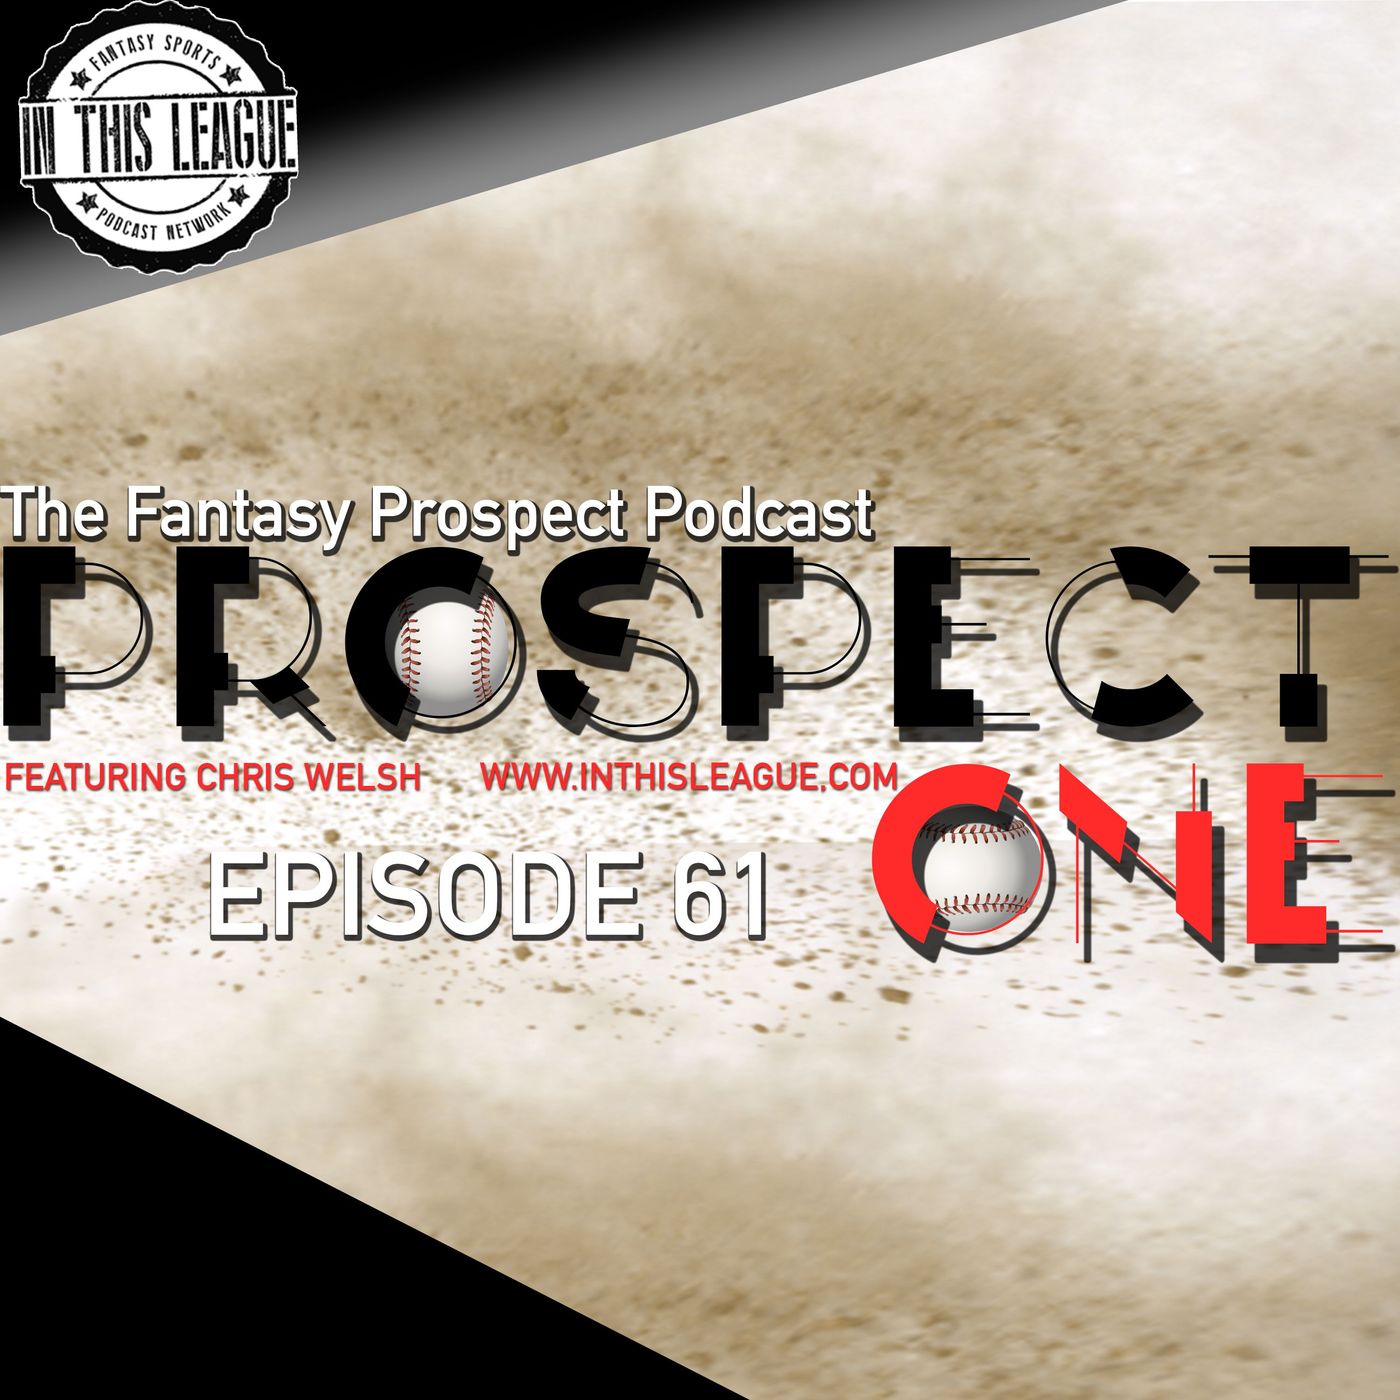 Episode 61 - Spring Training Notes And Prospect One Mailbag